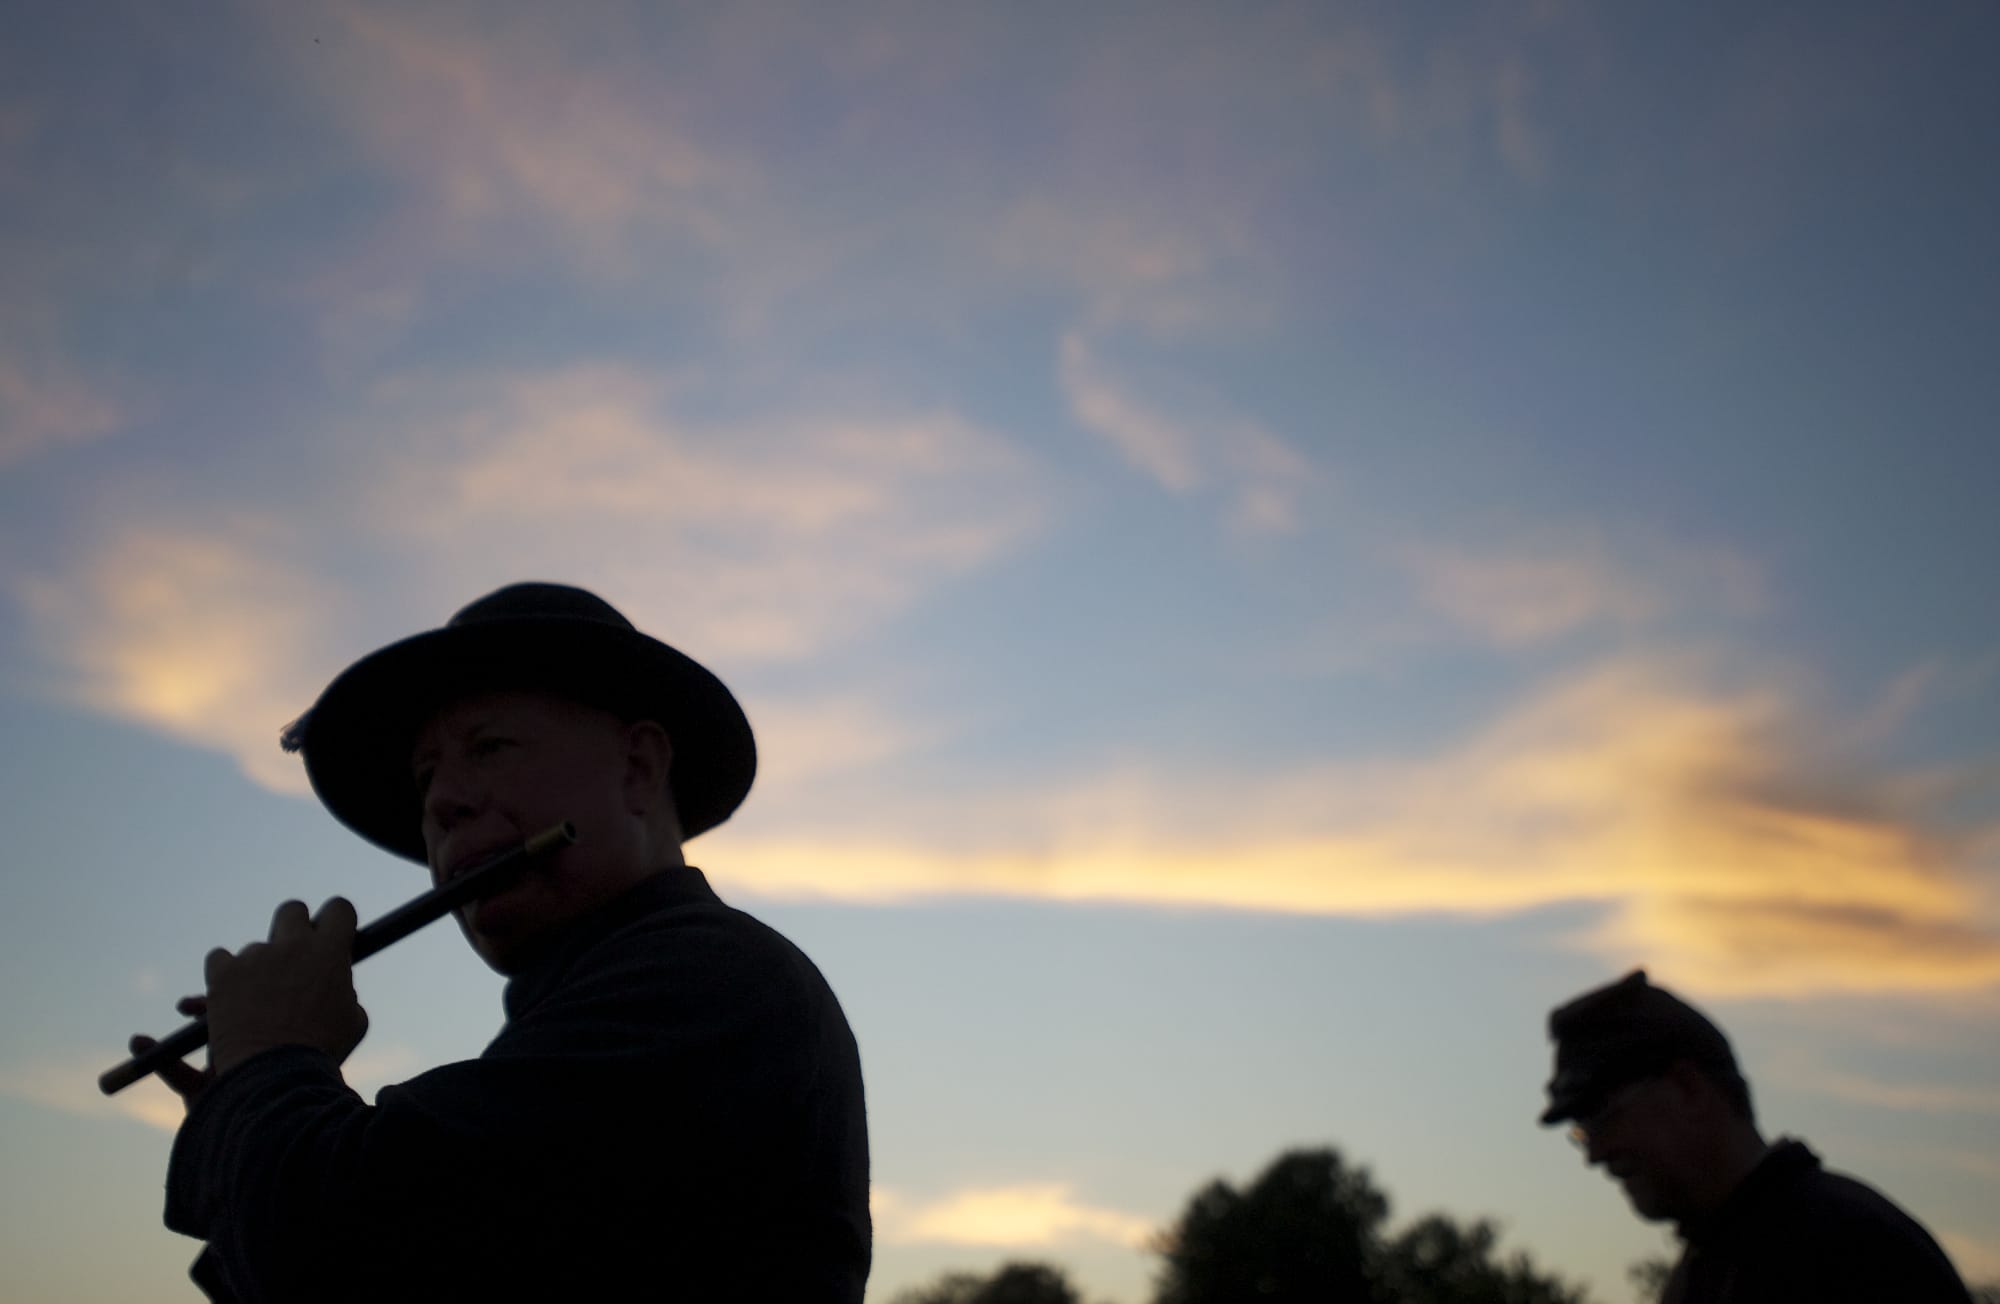 Mitch Rice of Milwaukie, Ore., plays &quot;When Johnny Comes Marching Home&quot; on a fife as a re-enactor in the 1st Oregon Volunteer Infantry during last year's Campfires and Candlelight at Fort Vancouver National Historic Site.